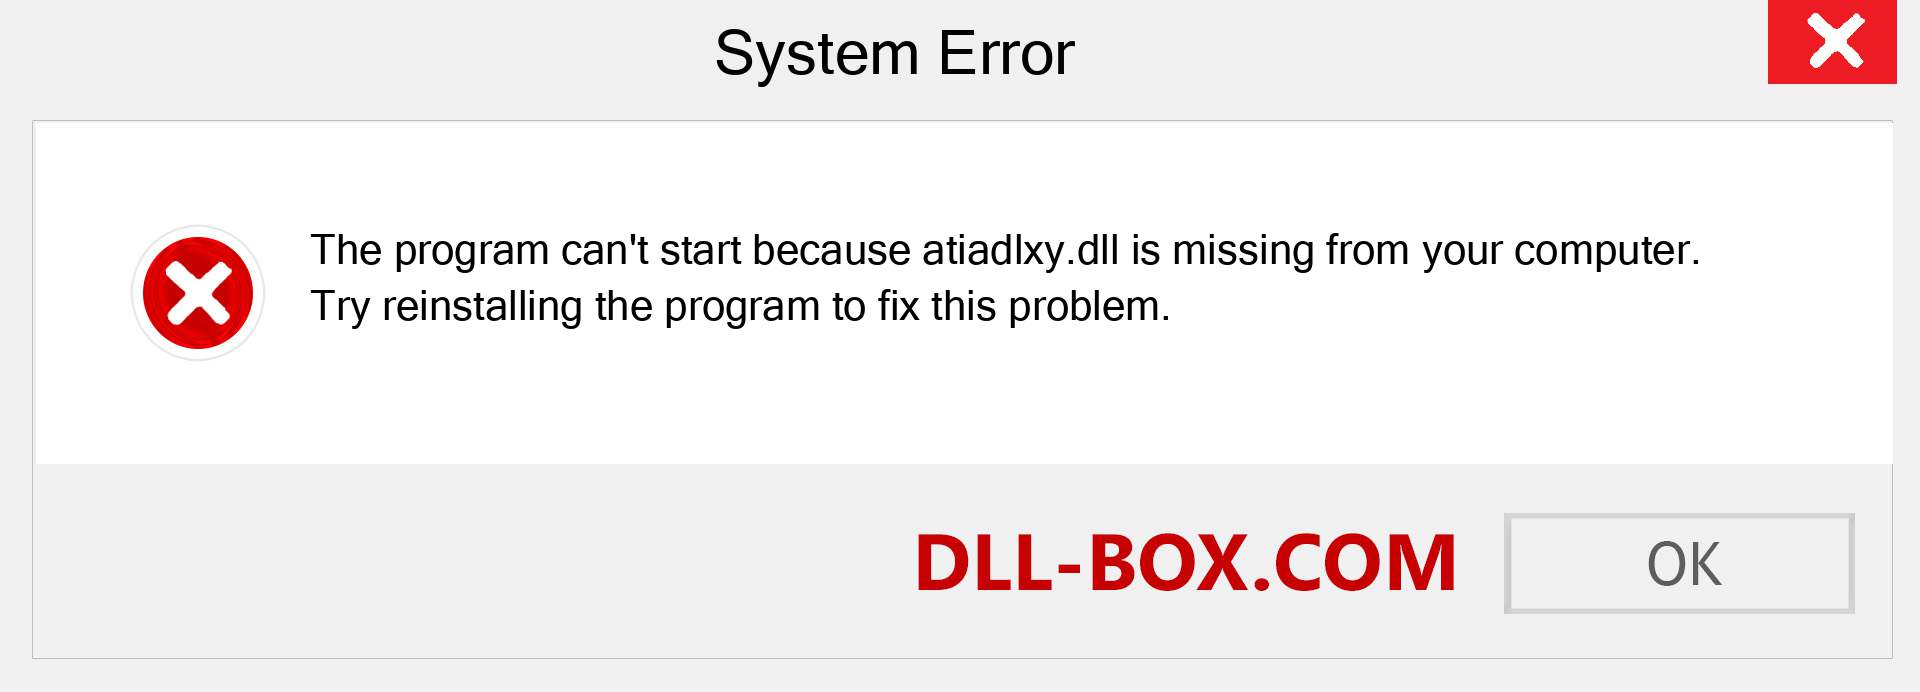  atiadlxy.dll file is missing?. Download for Windows 7, 8, 10 - Fix  atiadlxy dll Missing Error on Windows, photos, images